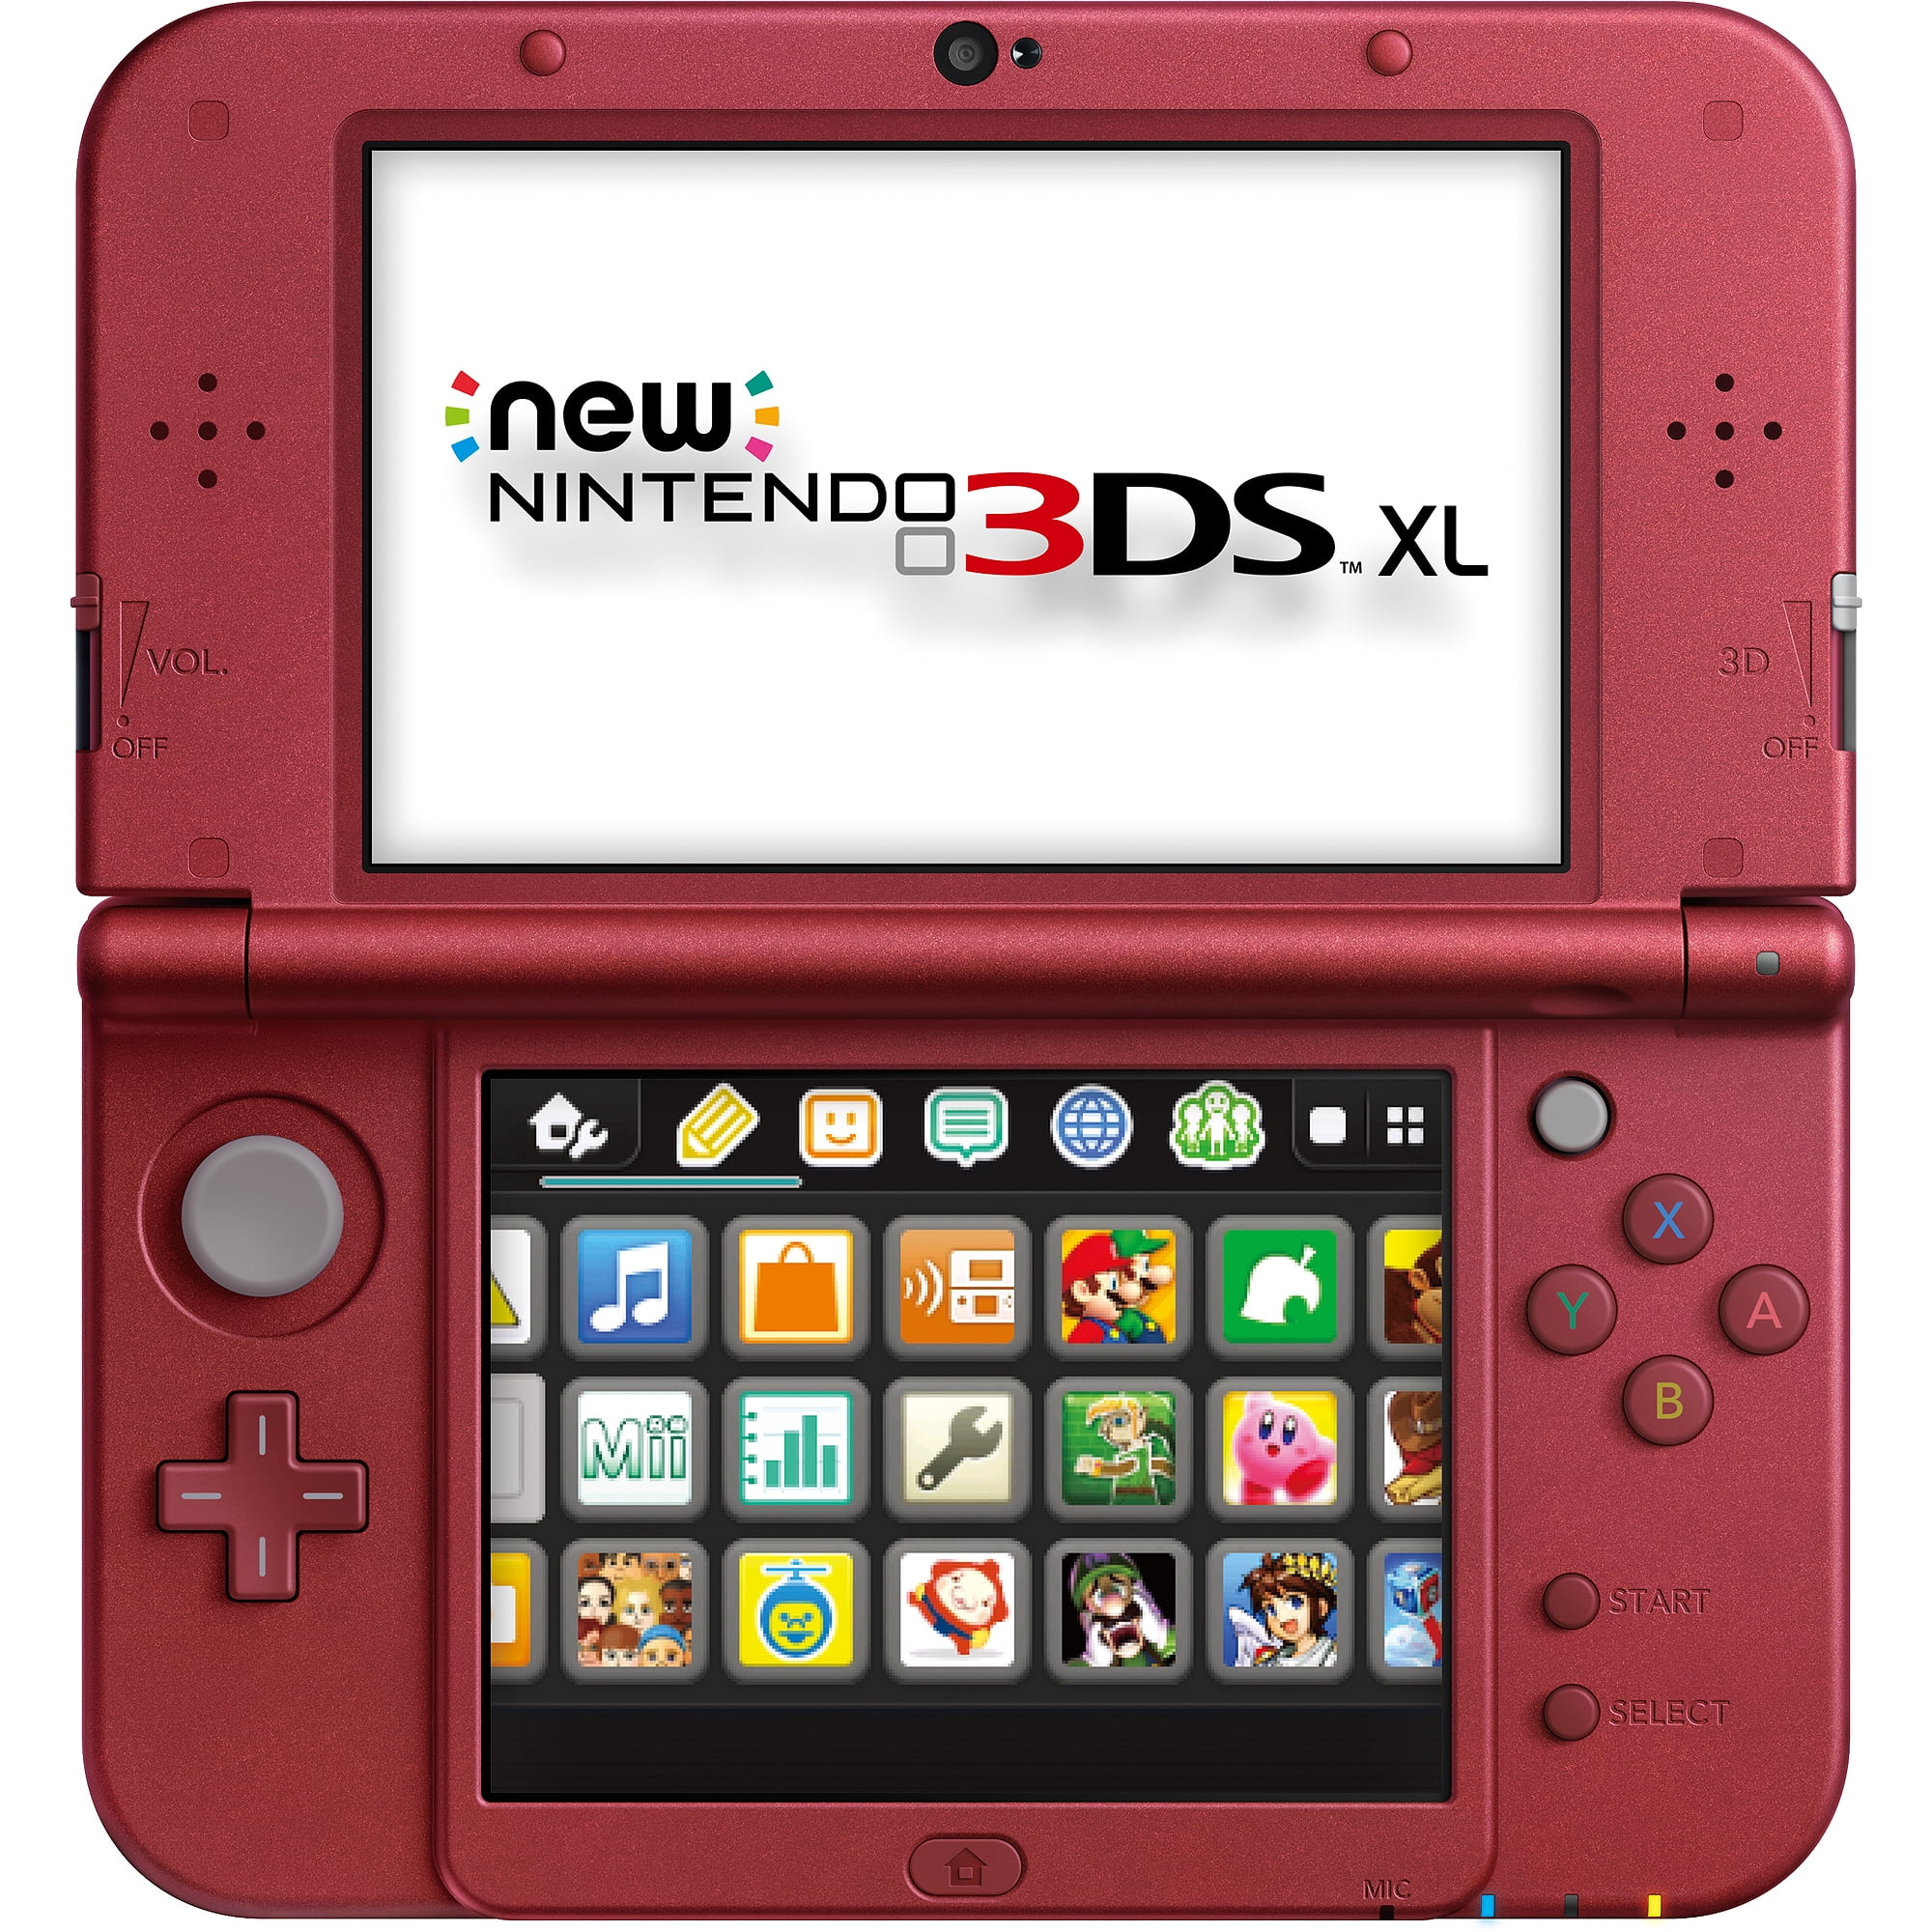 Nintendo 3DS Preview Already on Market?